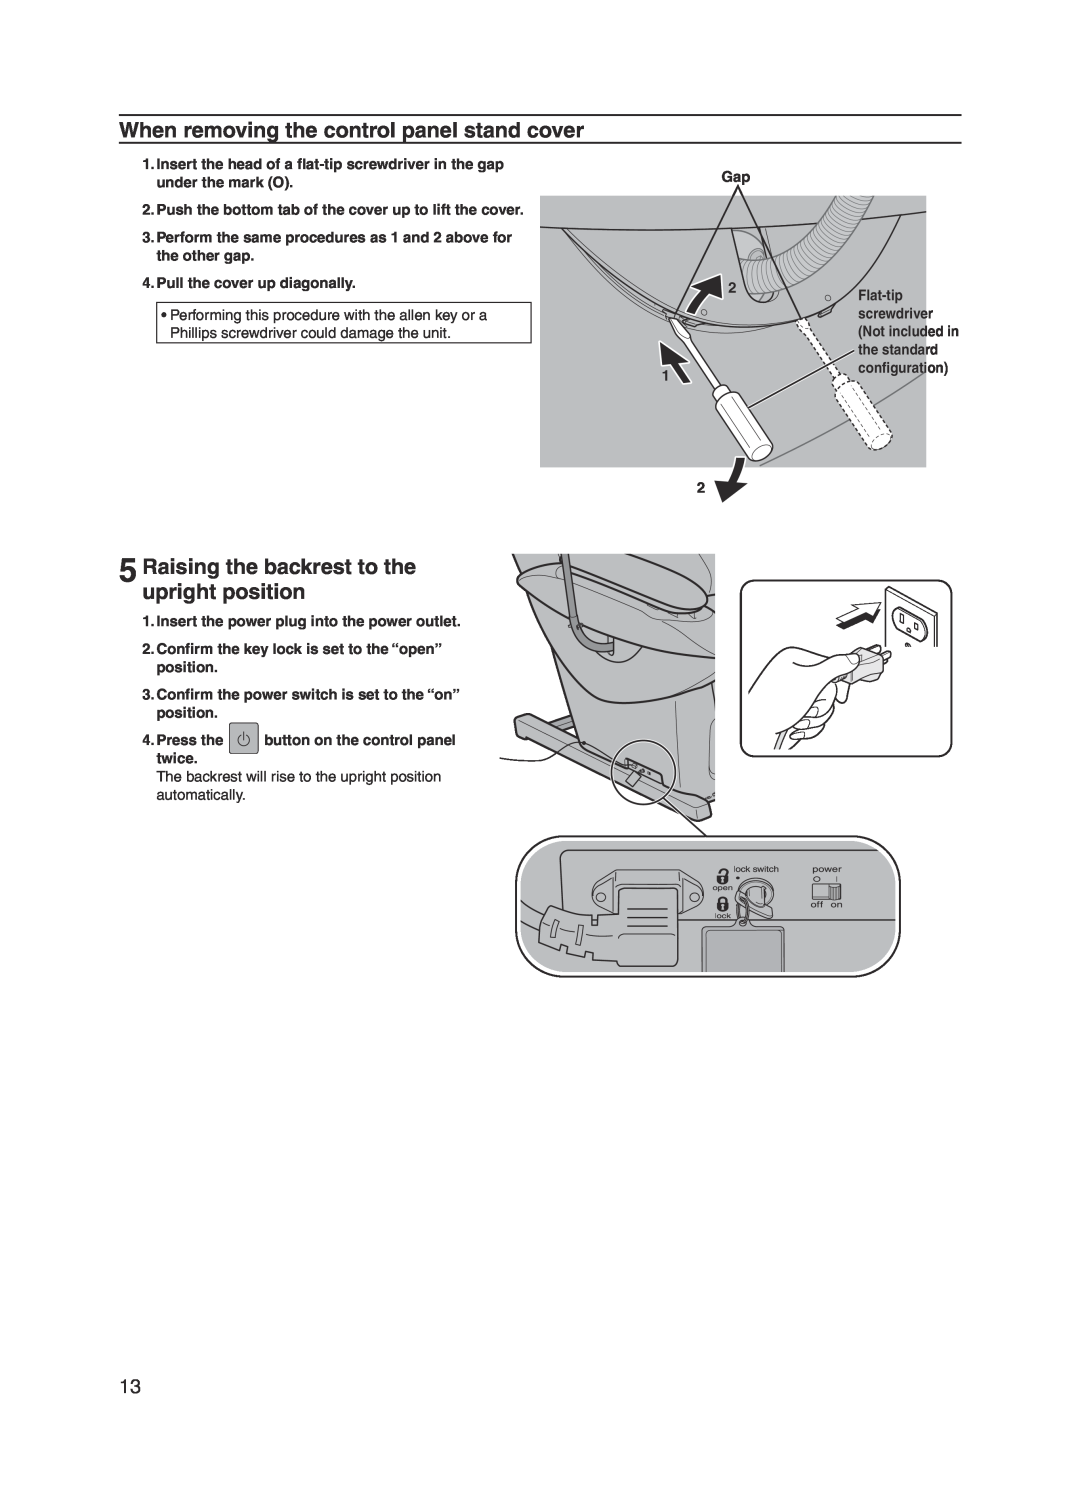 Panasonic EP30004 manual When removing the control panel stand cover, Raising the backrest to the upright position 